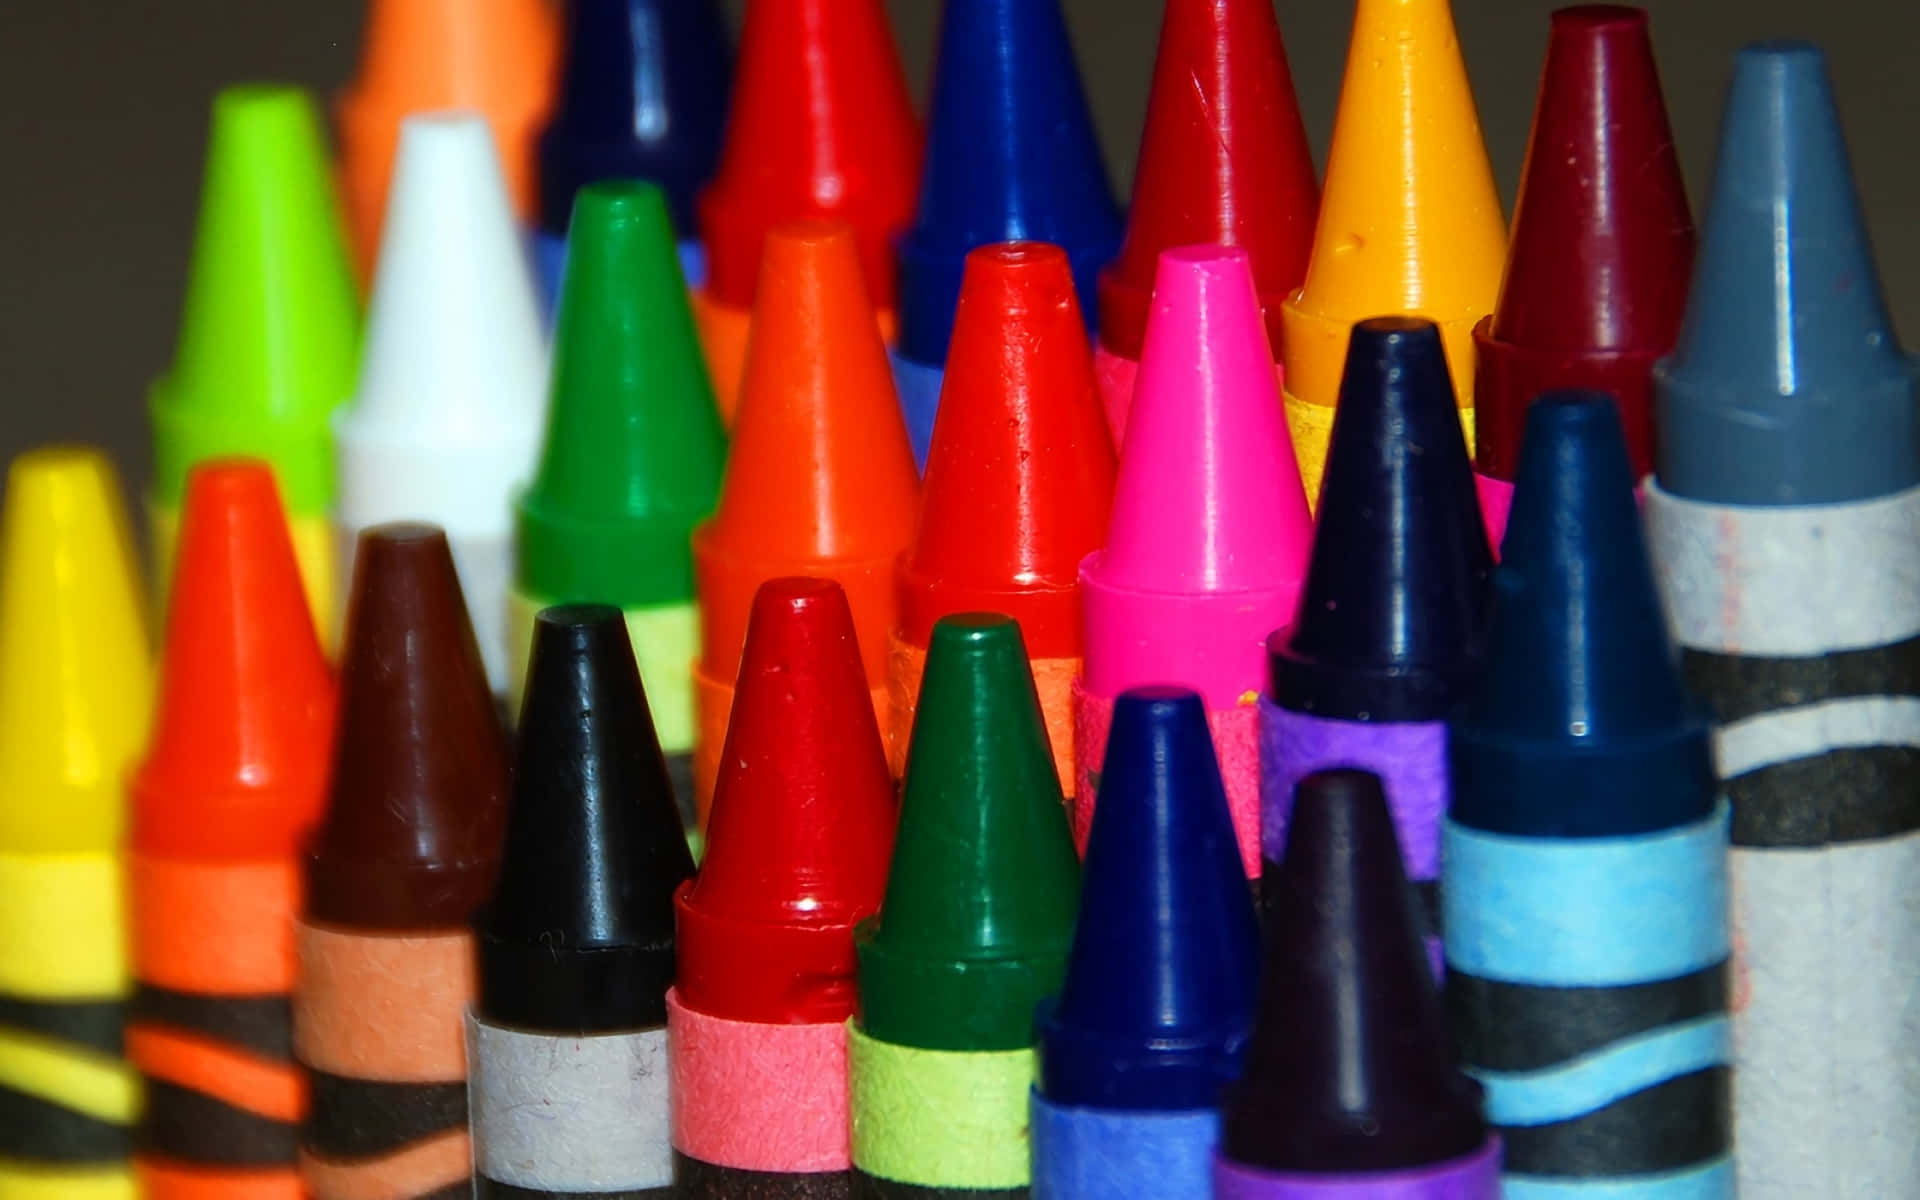 Vibrant 3D render of assorted crayons